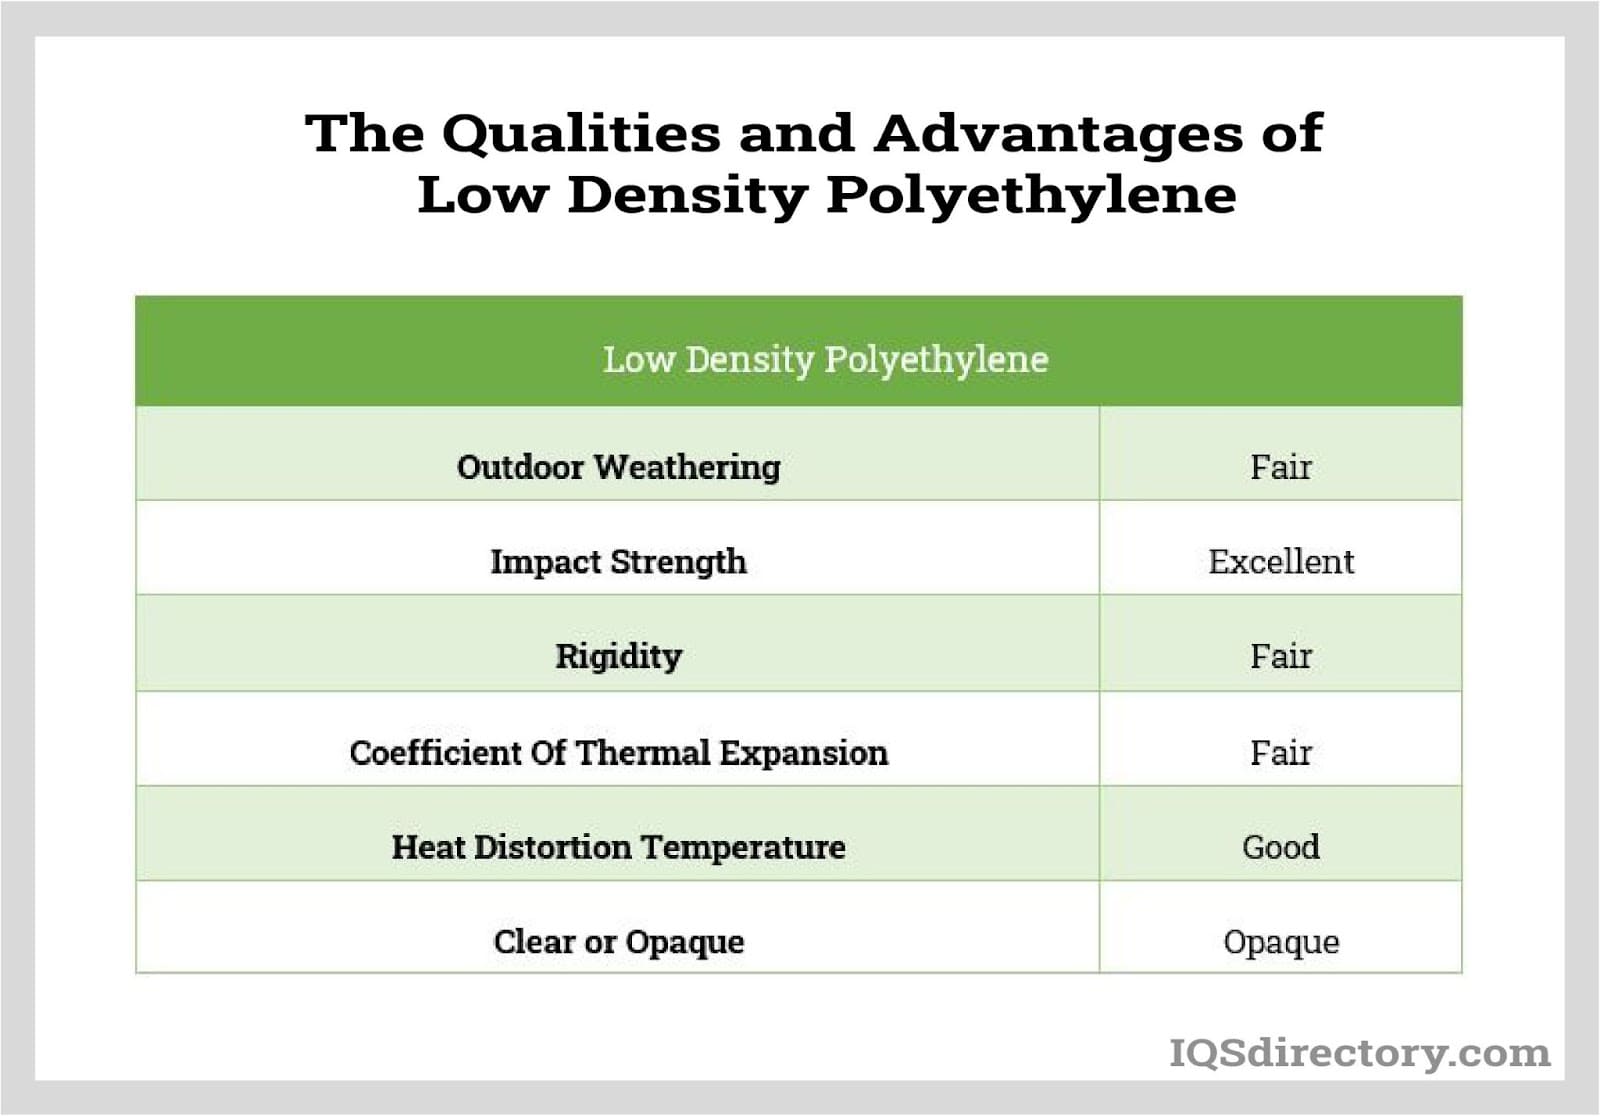 The Qualities and Advantages of Low Density Polyethylene